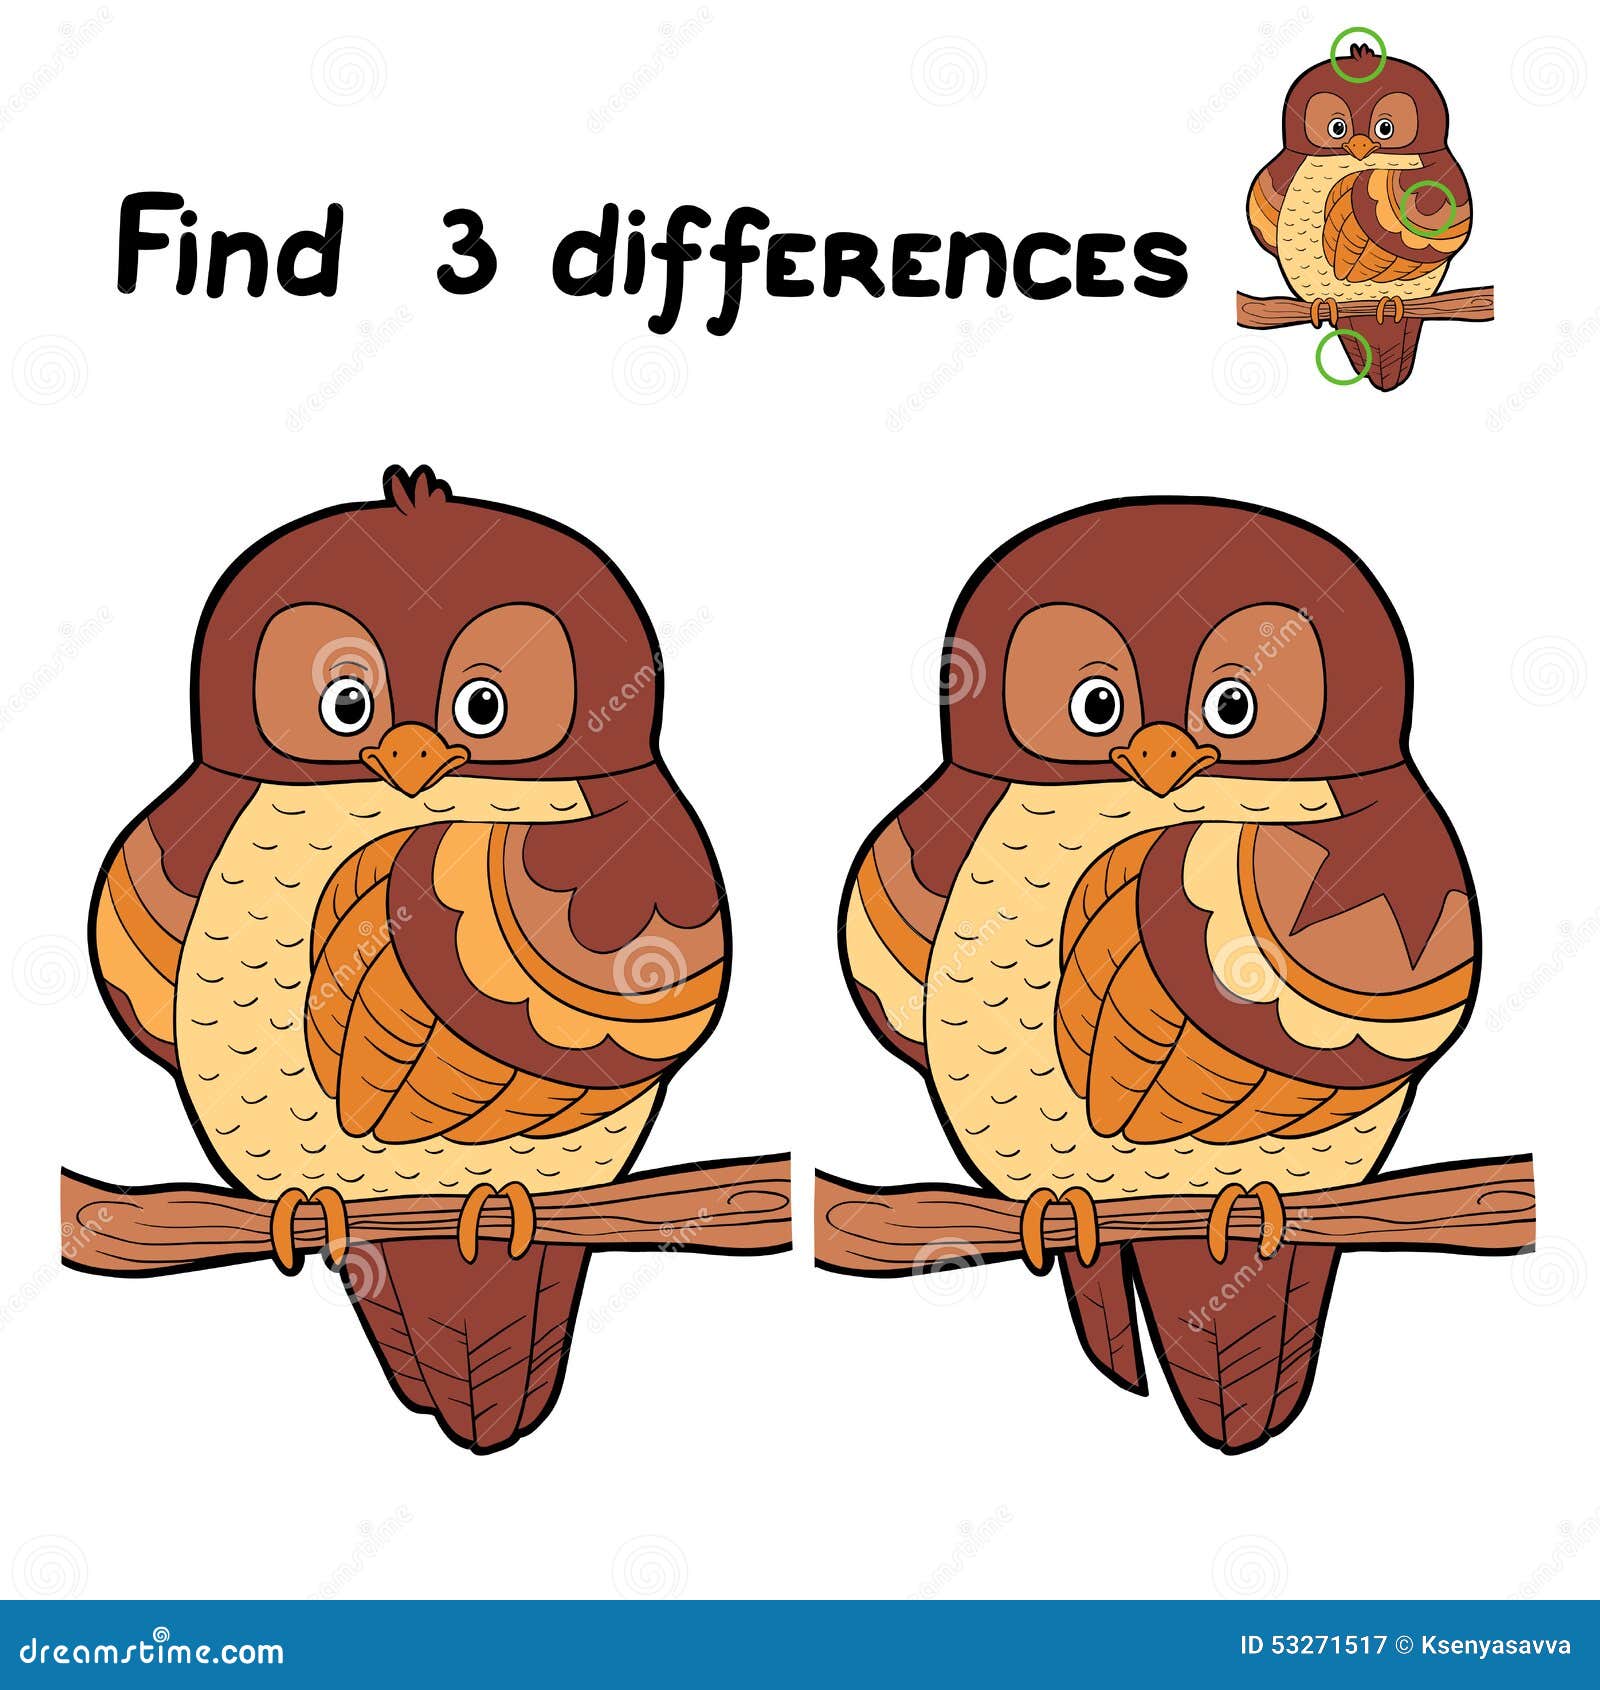 fina differences (owl)